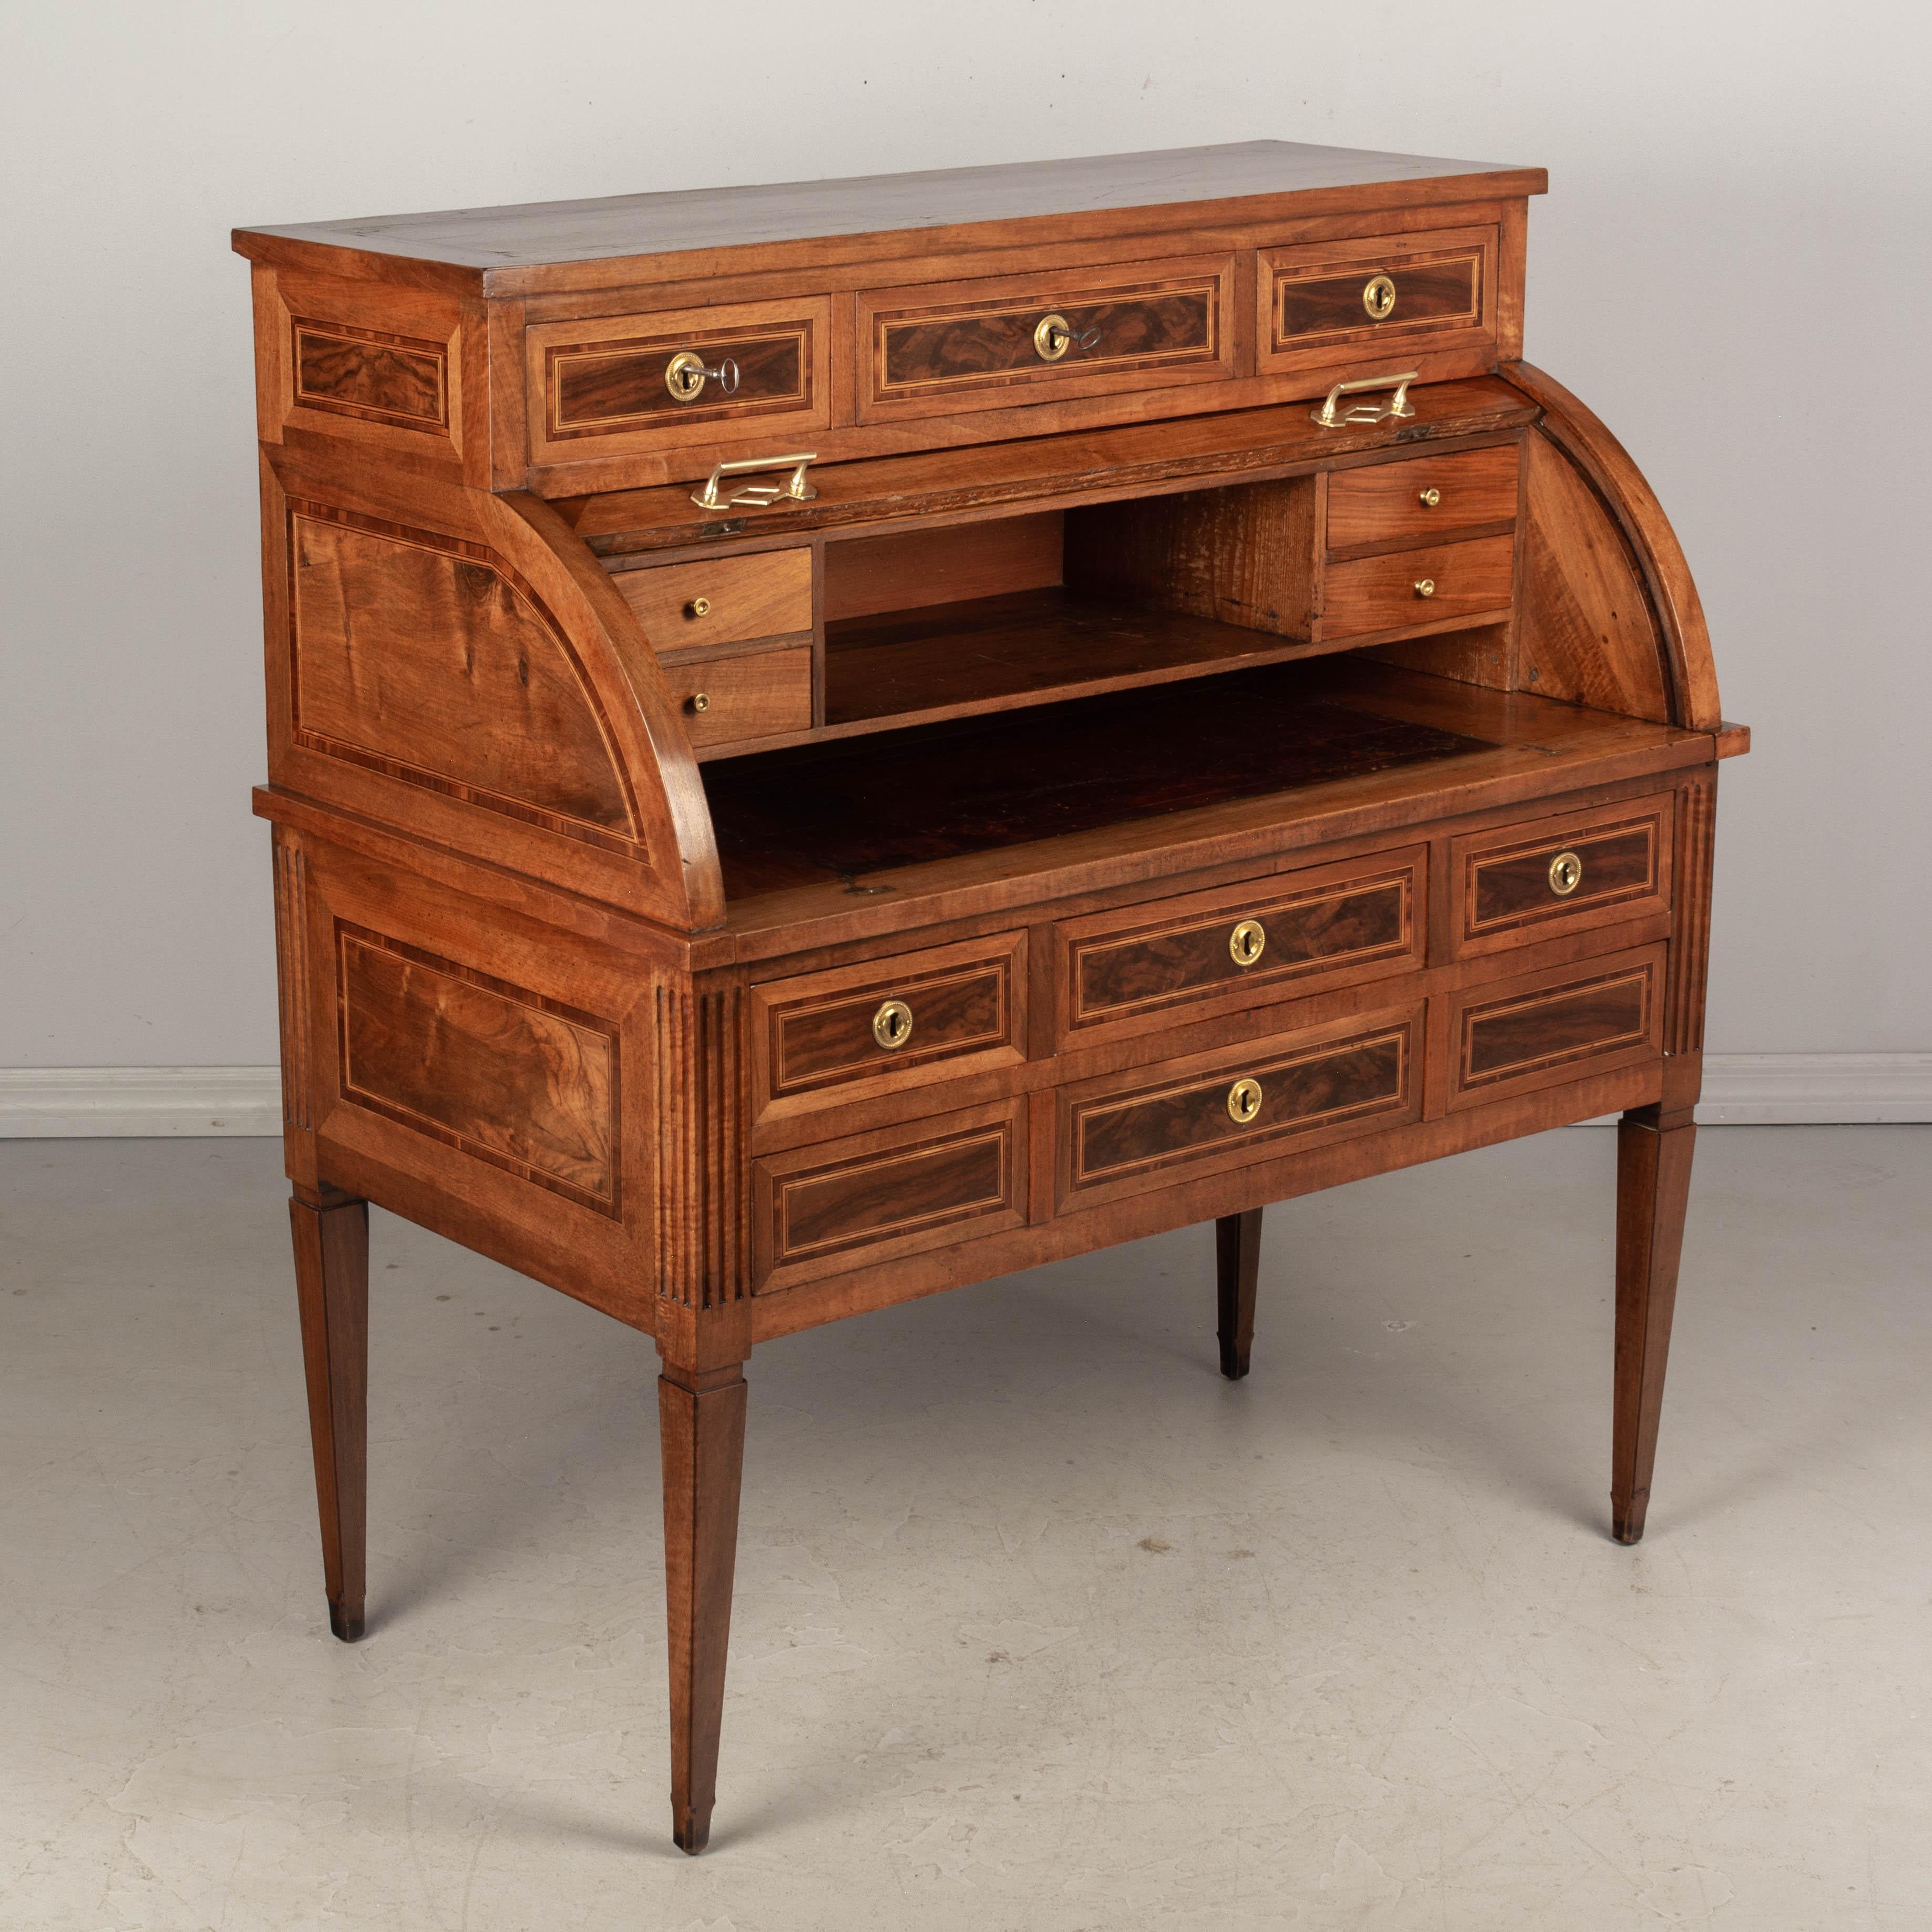 A fine 18h century Louis XVI period bureau à cylindre, or roll top desk, made of solid walnut with veneers of burled walnut, mahogany marquetry inlay and pine as a secondary wood. The surface of the cylinder is bookmatched burl of walnut veneer and